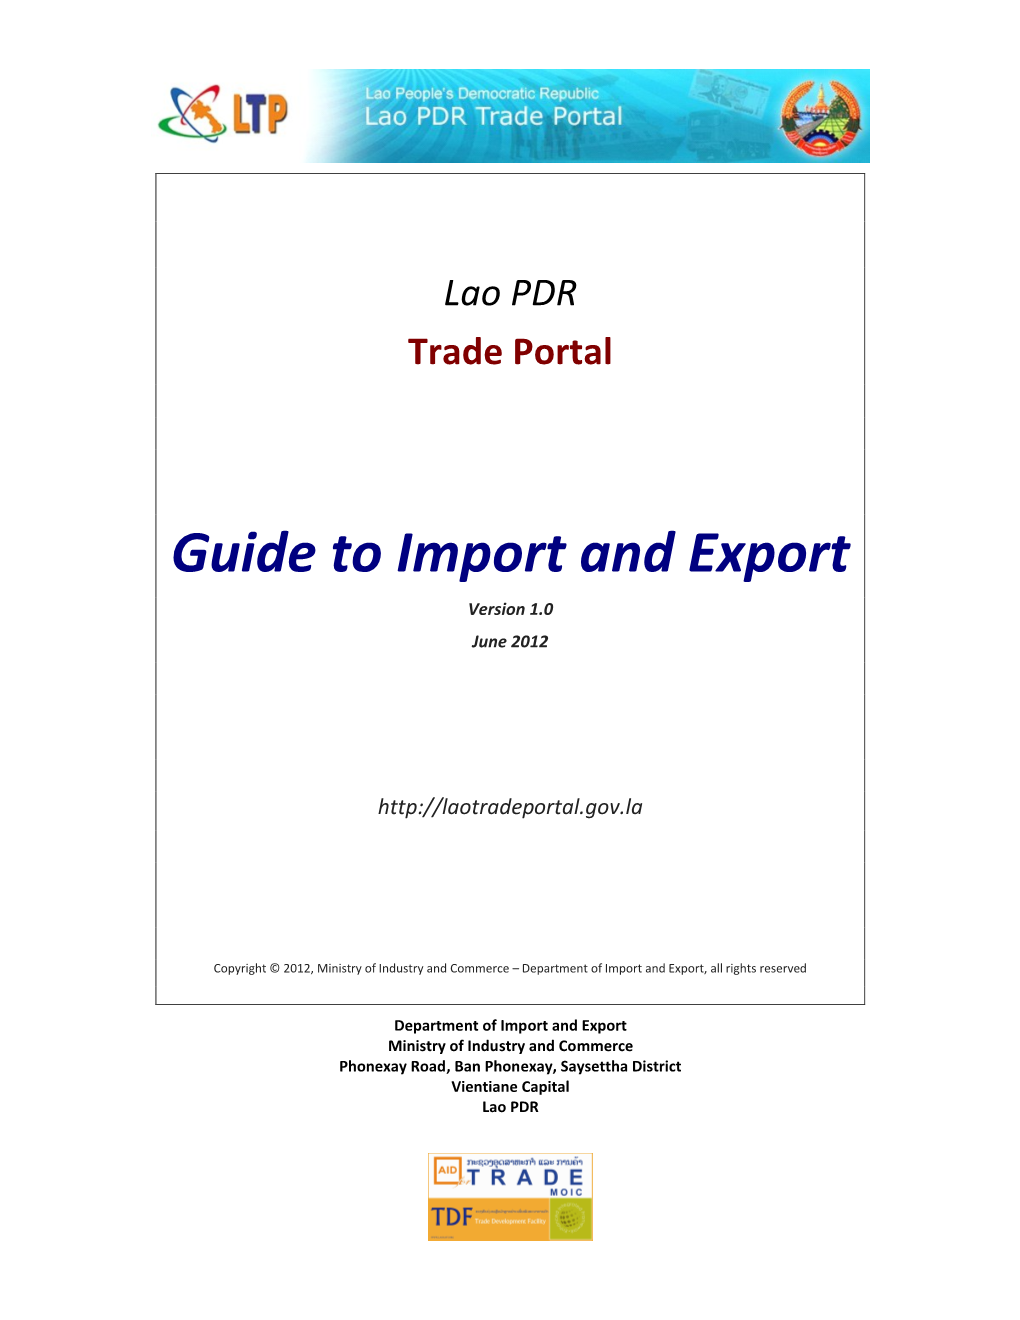 Guide to Import and Export – Lao PDR Trade Portal